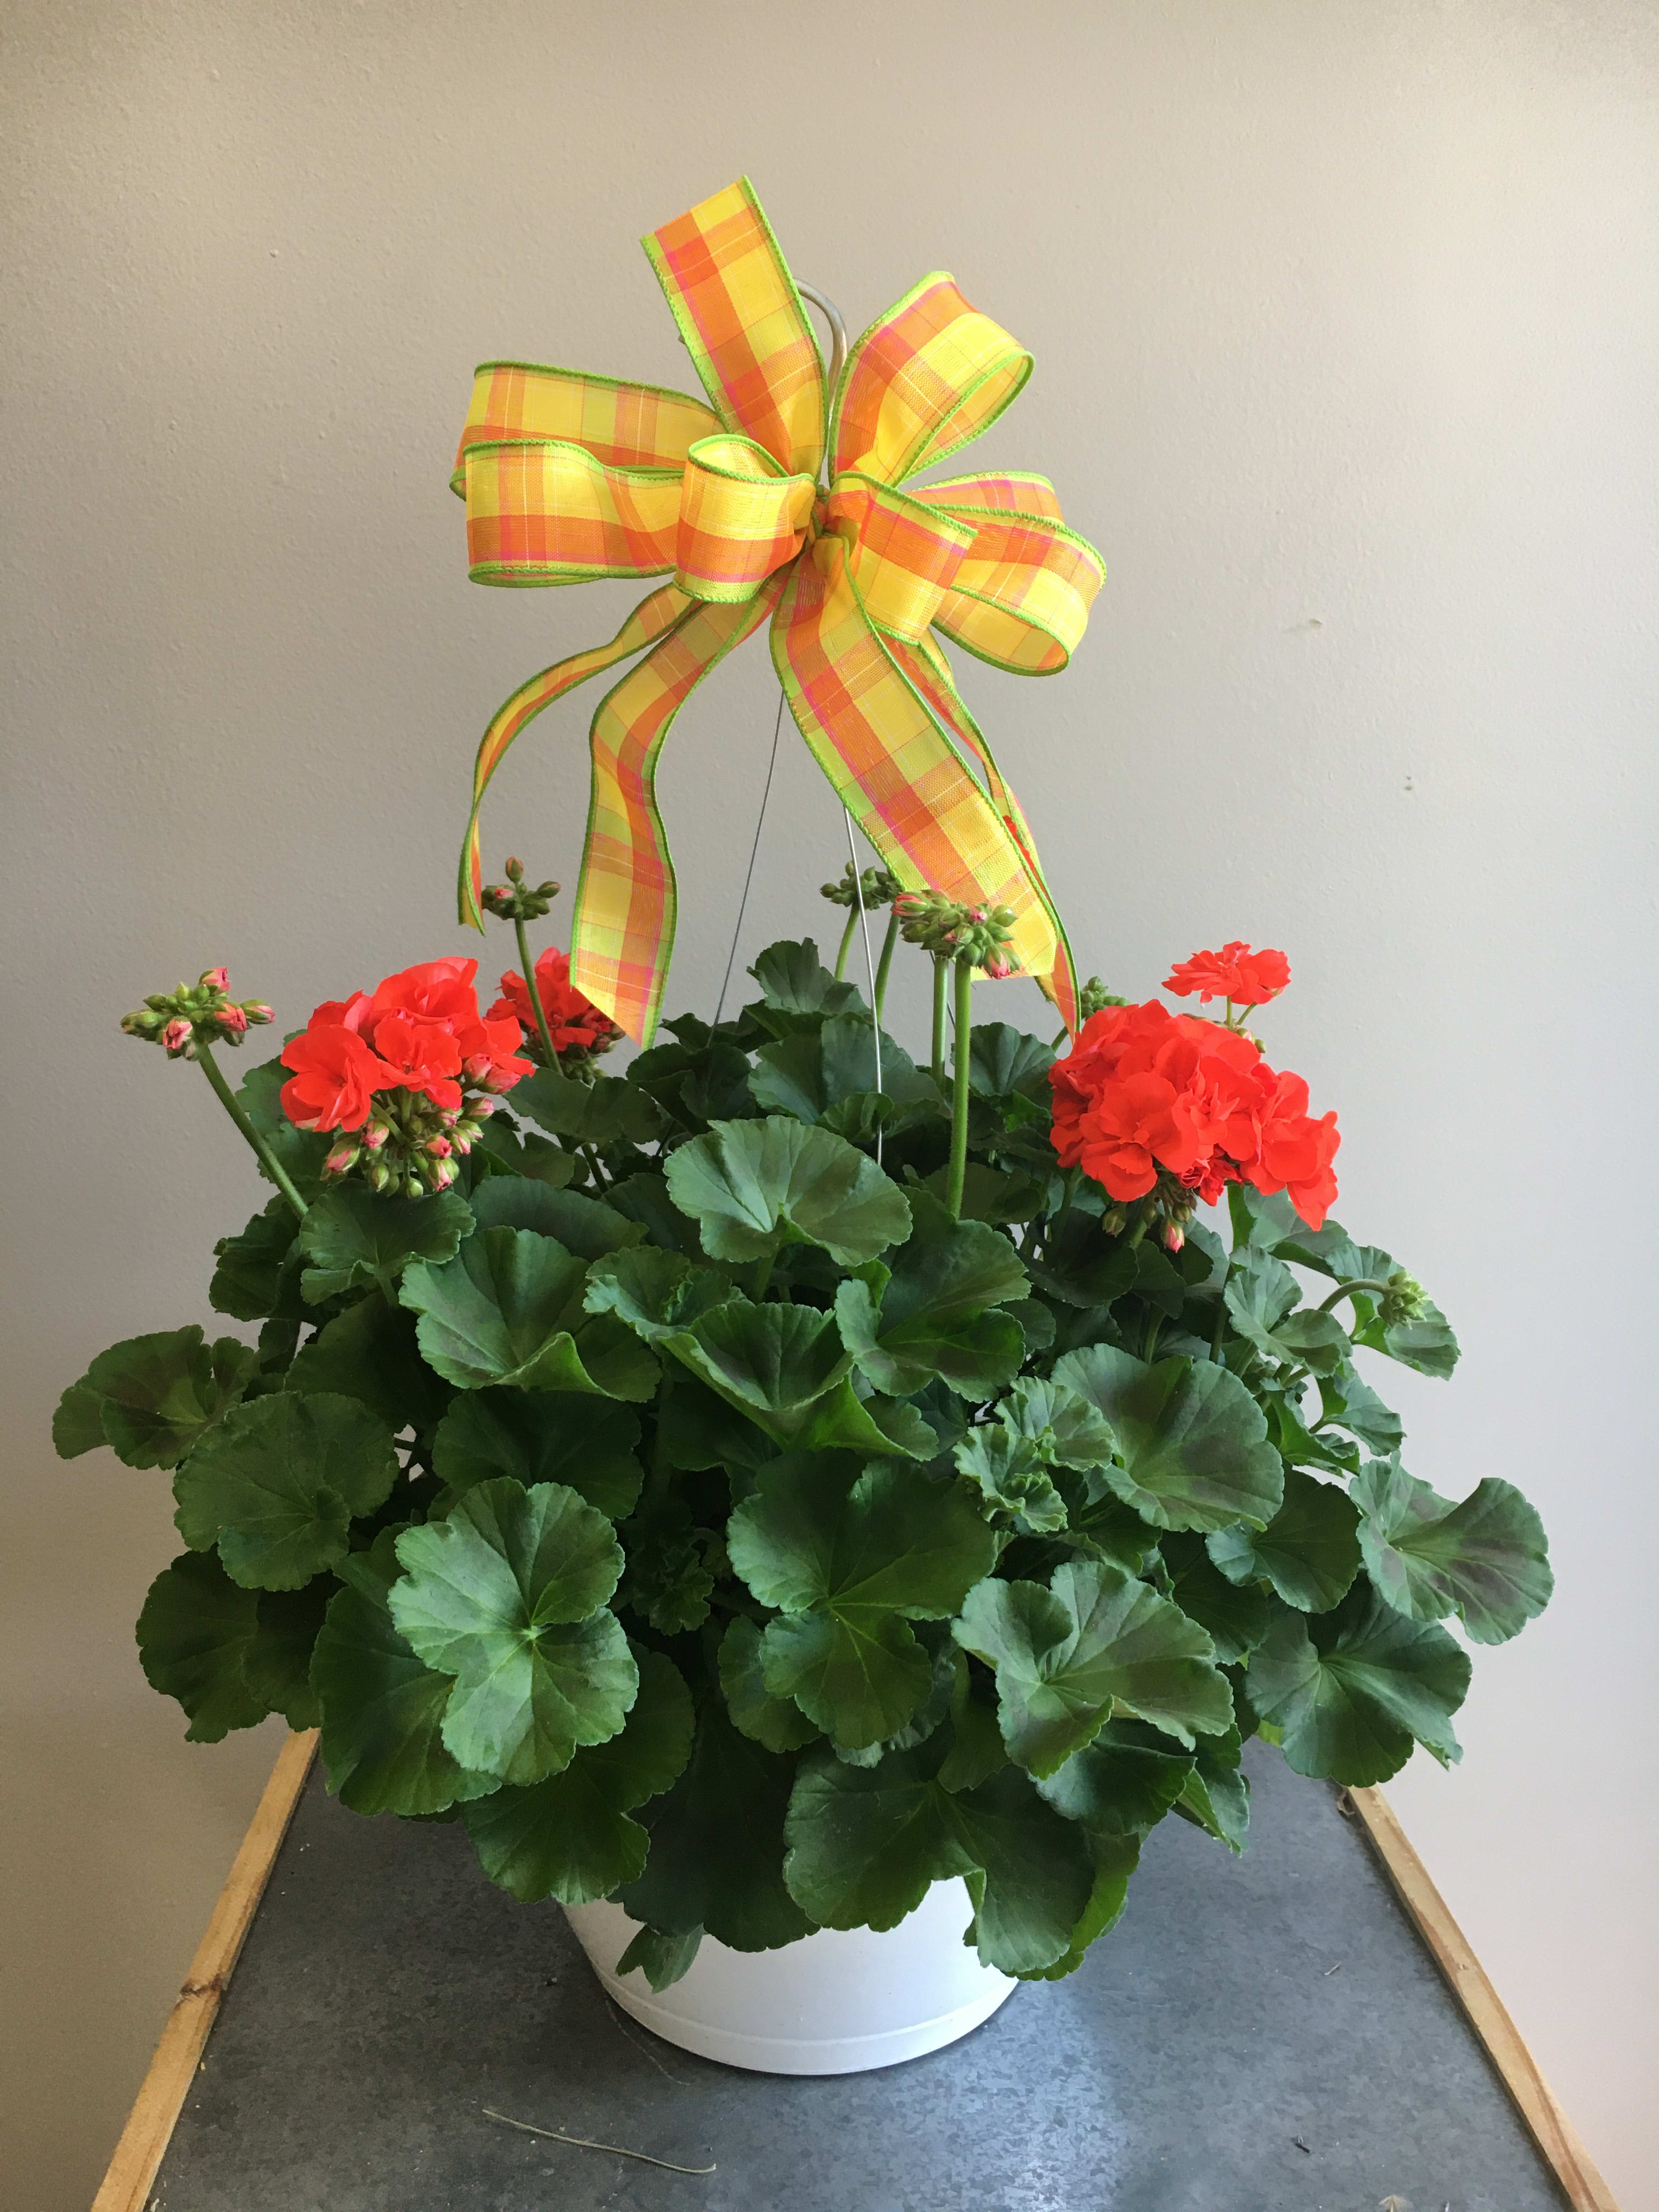 Geranium Smiles - This bright and traditional plant is perfect to brighten up anyone's porch! We have several colors that can help brighten up anyone's day! *If you have a particular color in mind, please add it to the special instructions part of the order* 